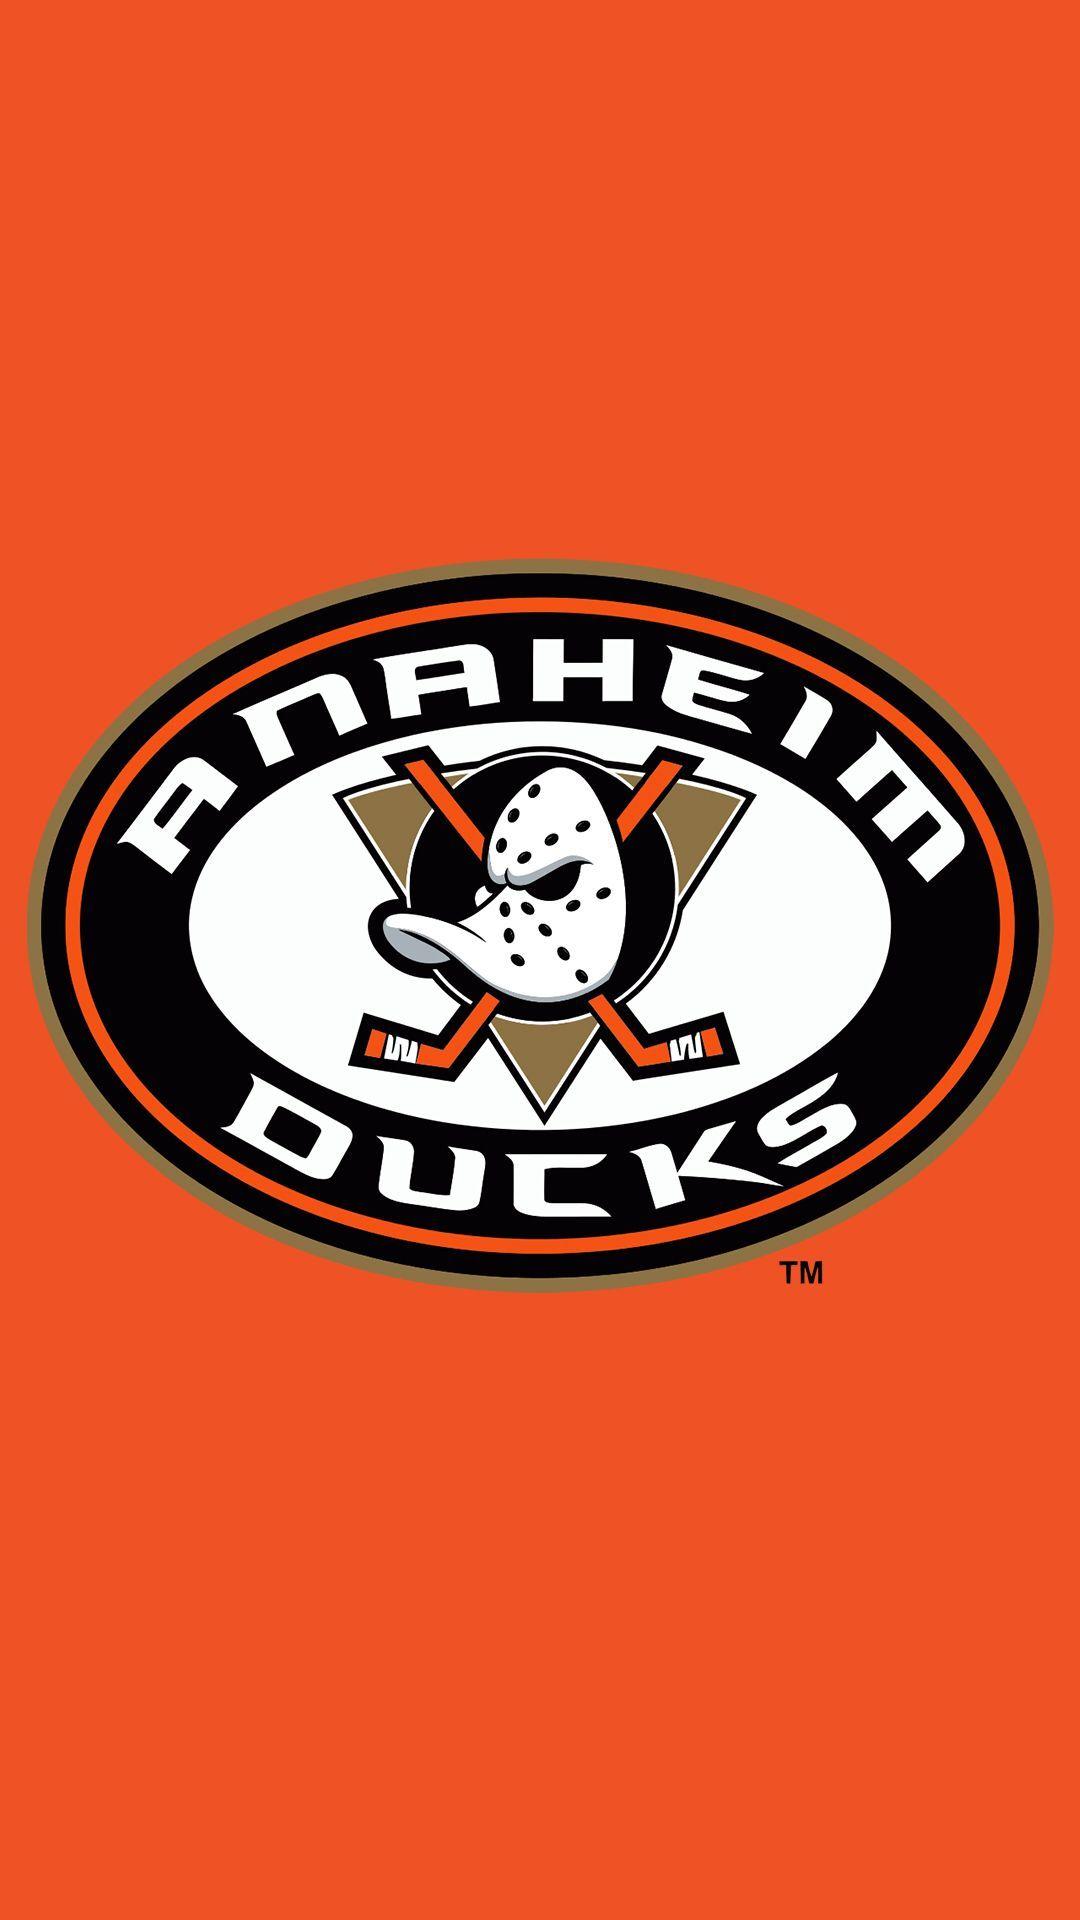 Anaheim Ducks iPhone 6 plus wallpaper created by me. iPhone 6 plus